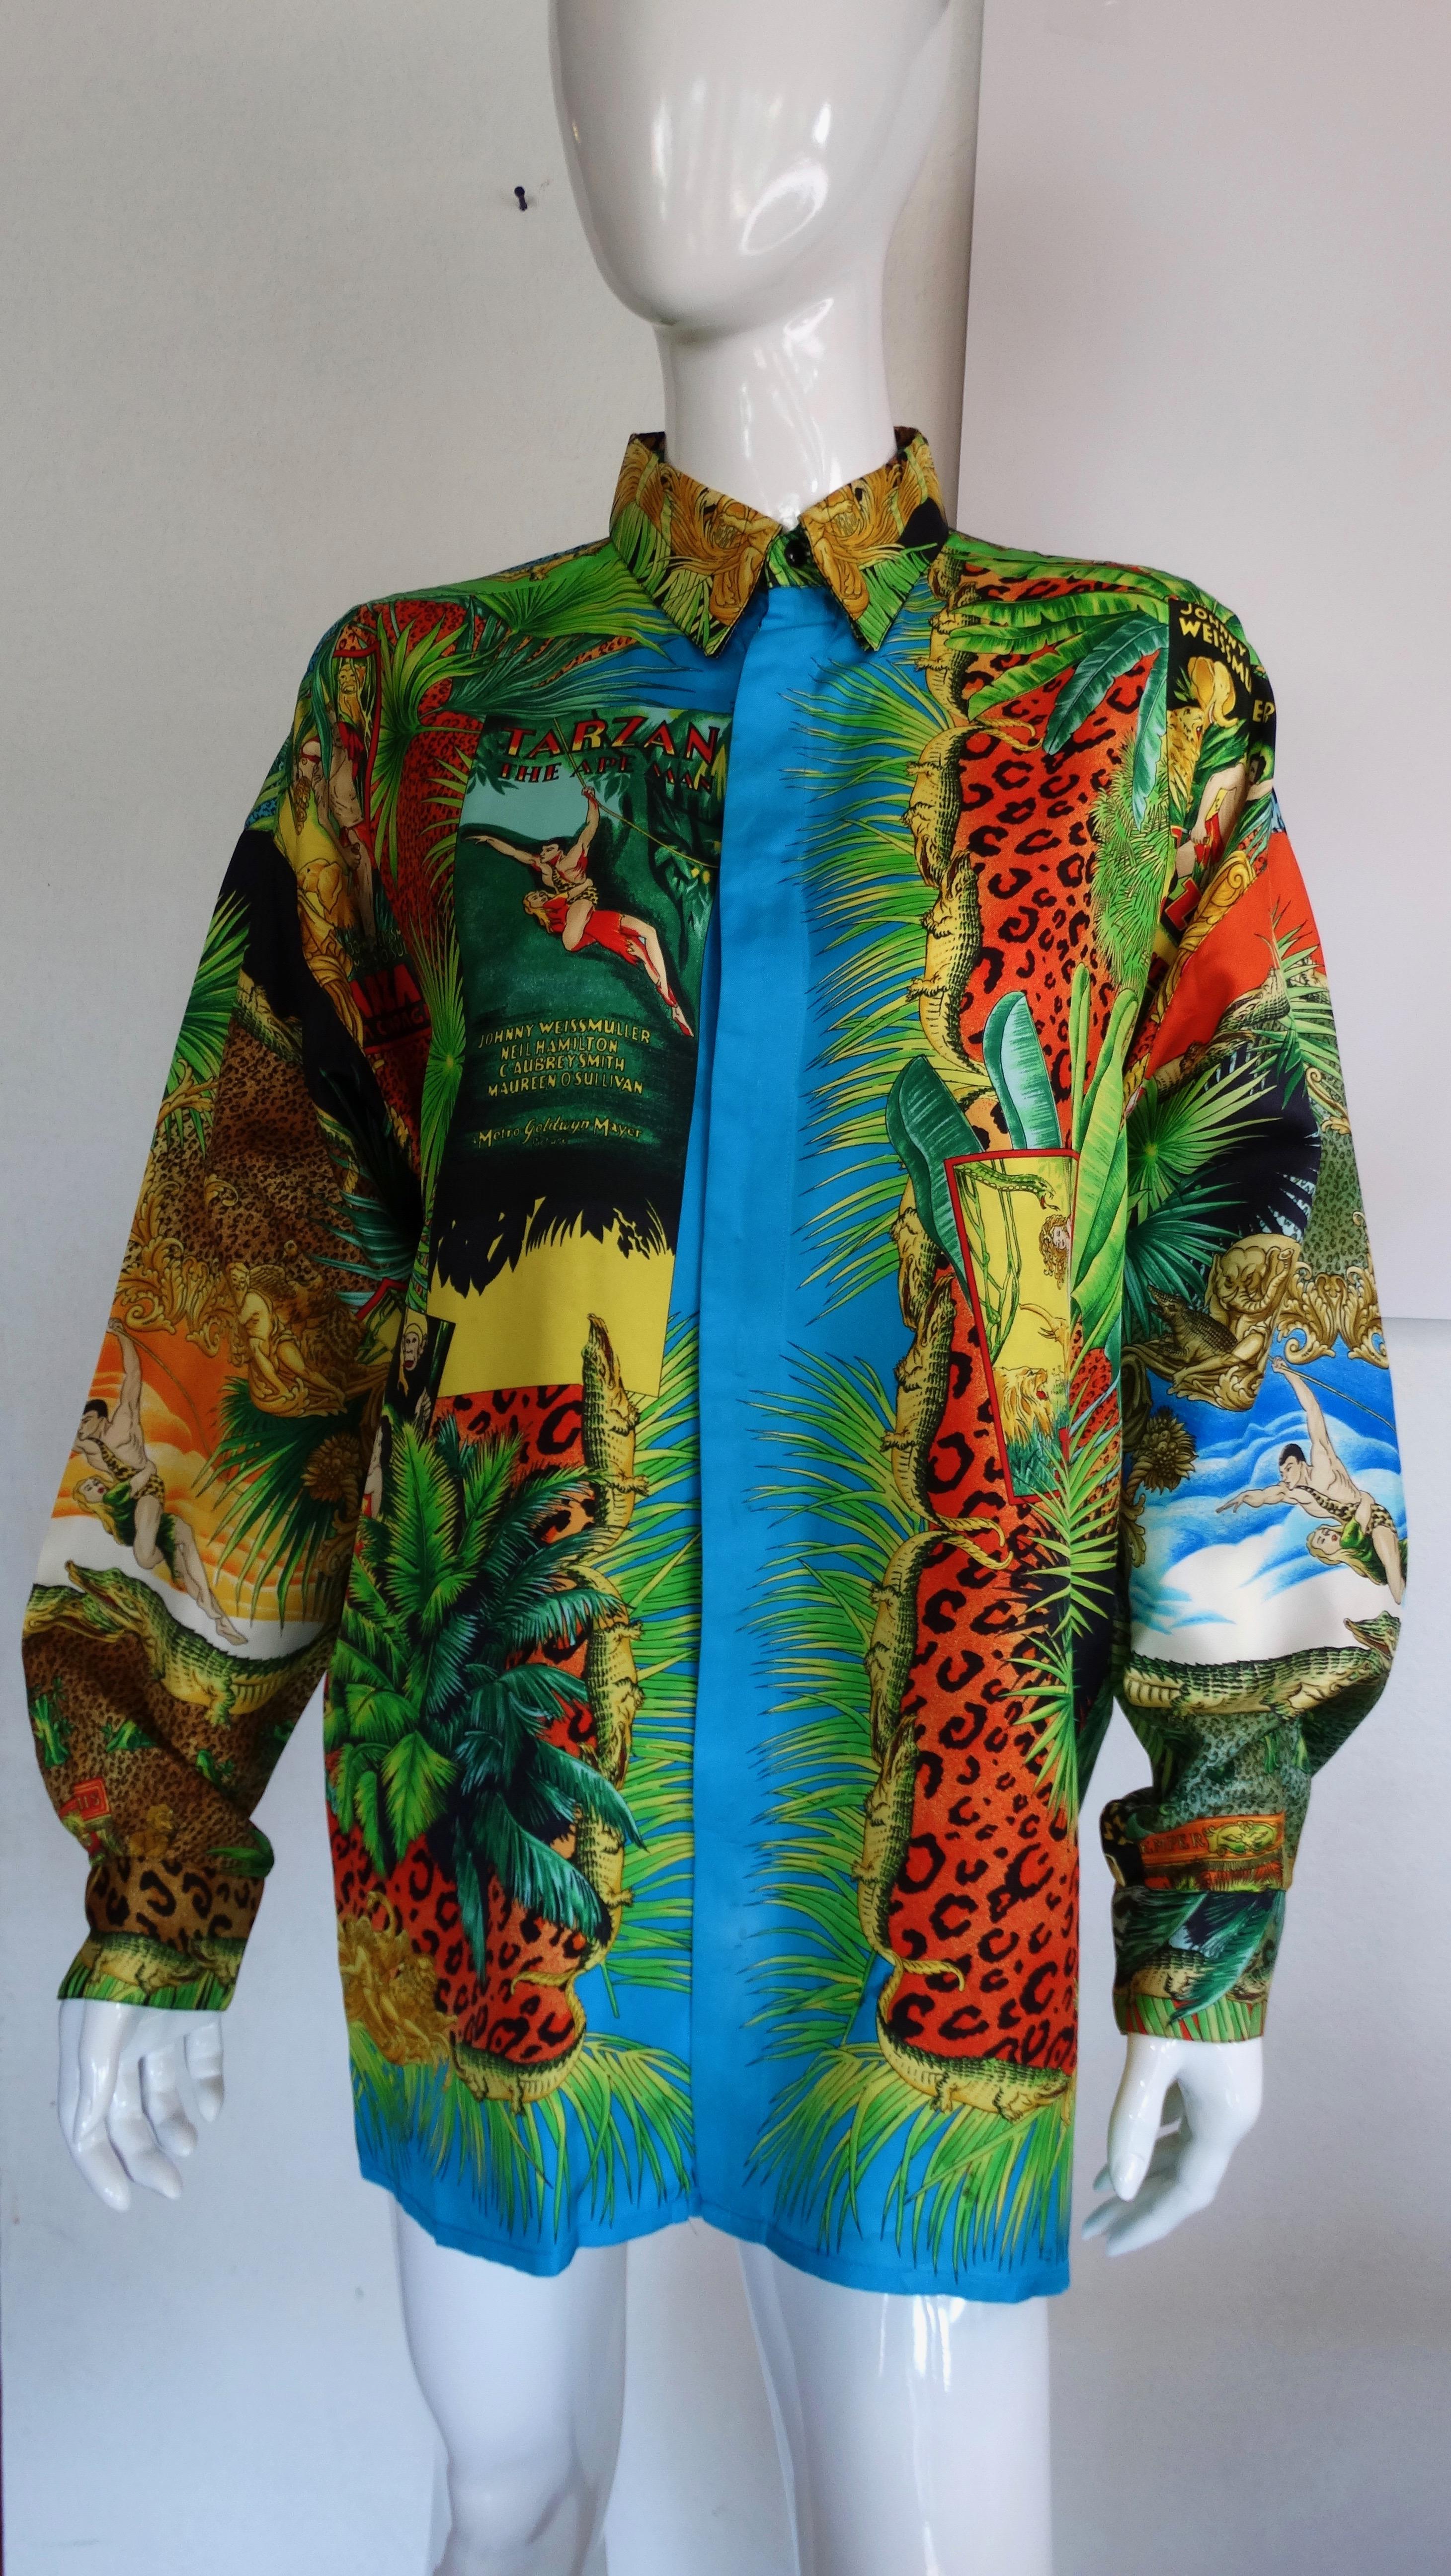 Snag yourself a piece straight from the Versace archives! Circa 1993 from Versace's S/S collection, this tropical Tarzan print features various motifs of Tarzan and Jane, Tarzan memorabilia, multi-colored animal prints, tropical greenery and rich